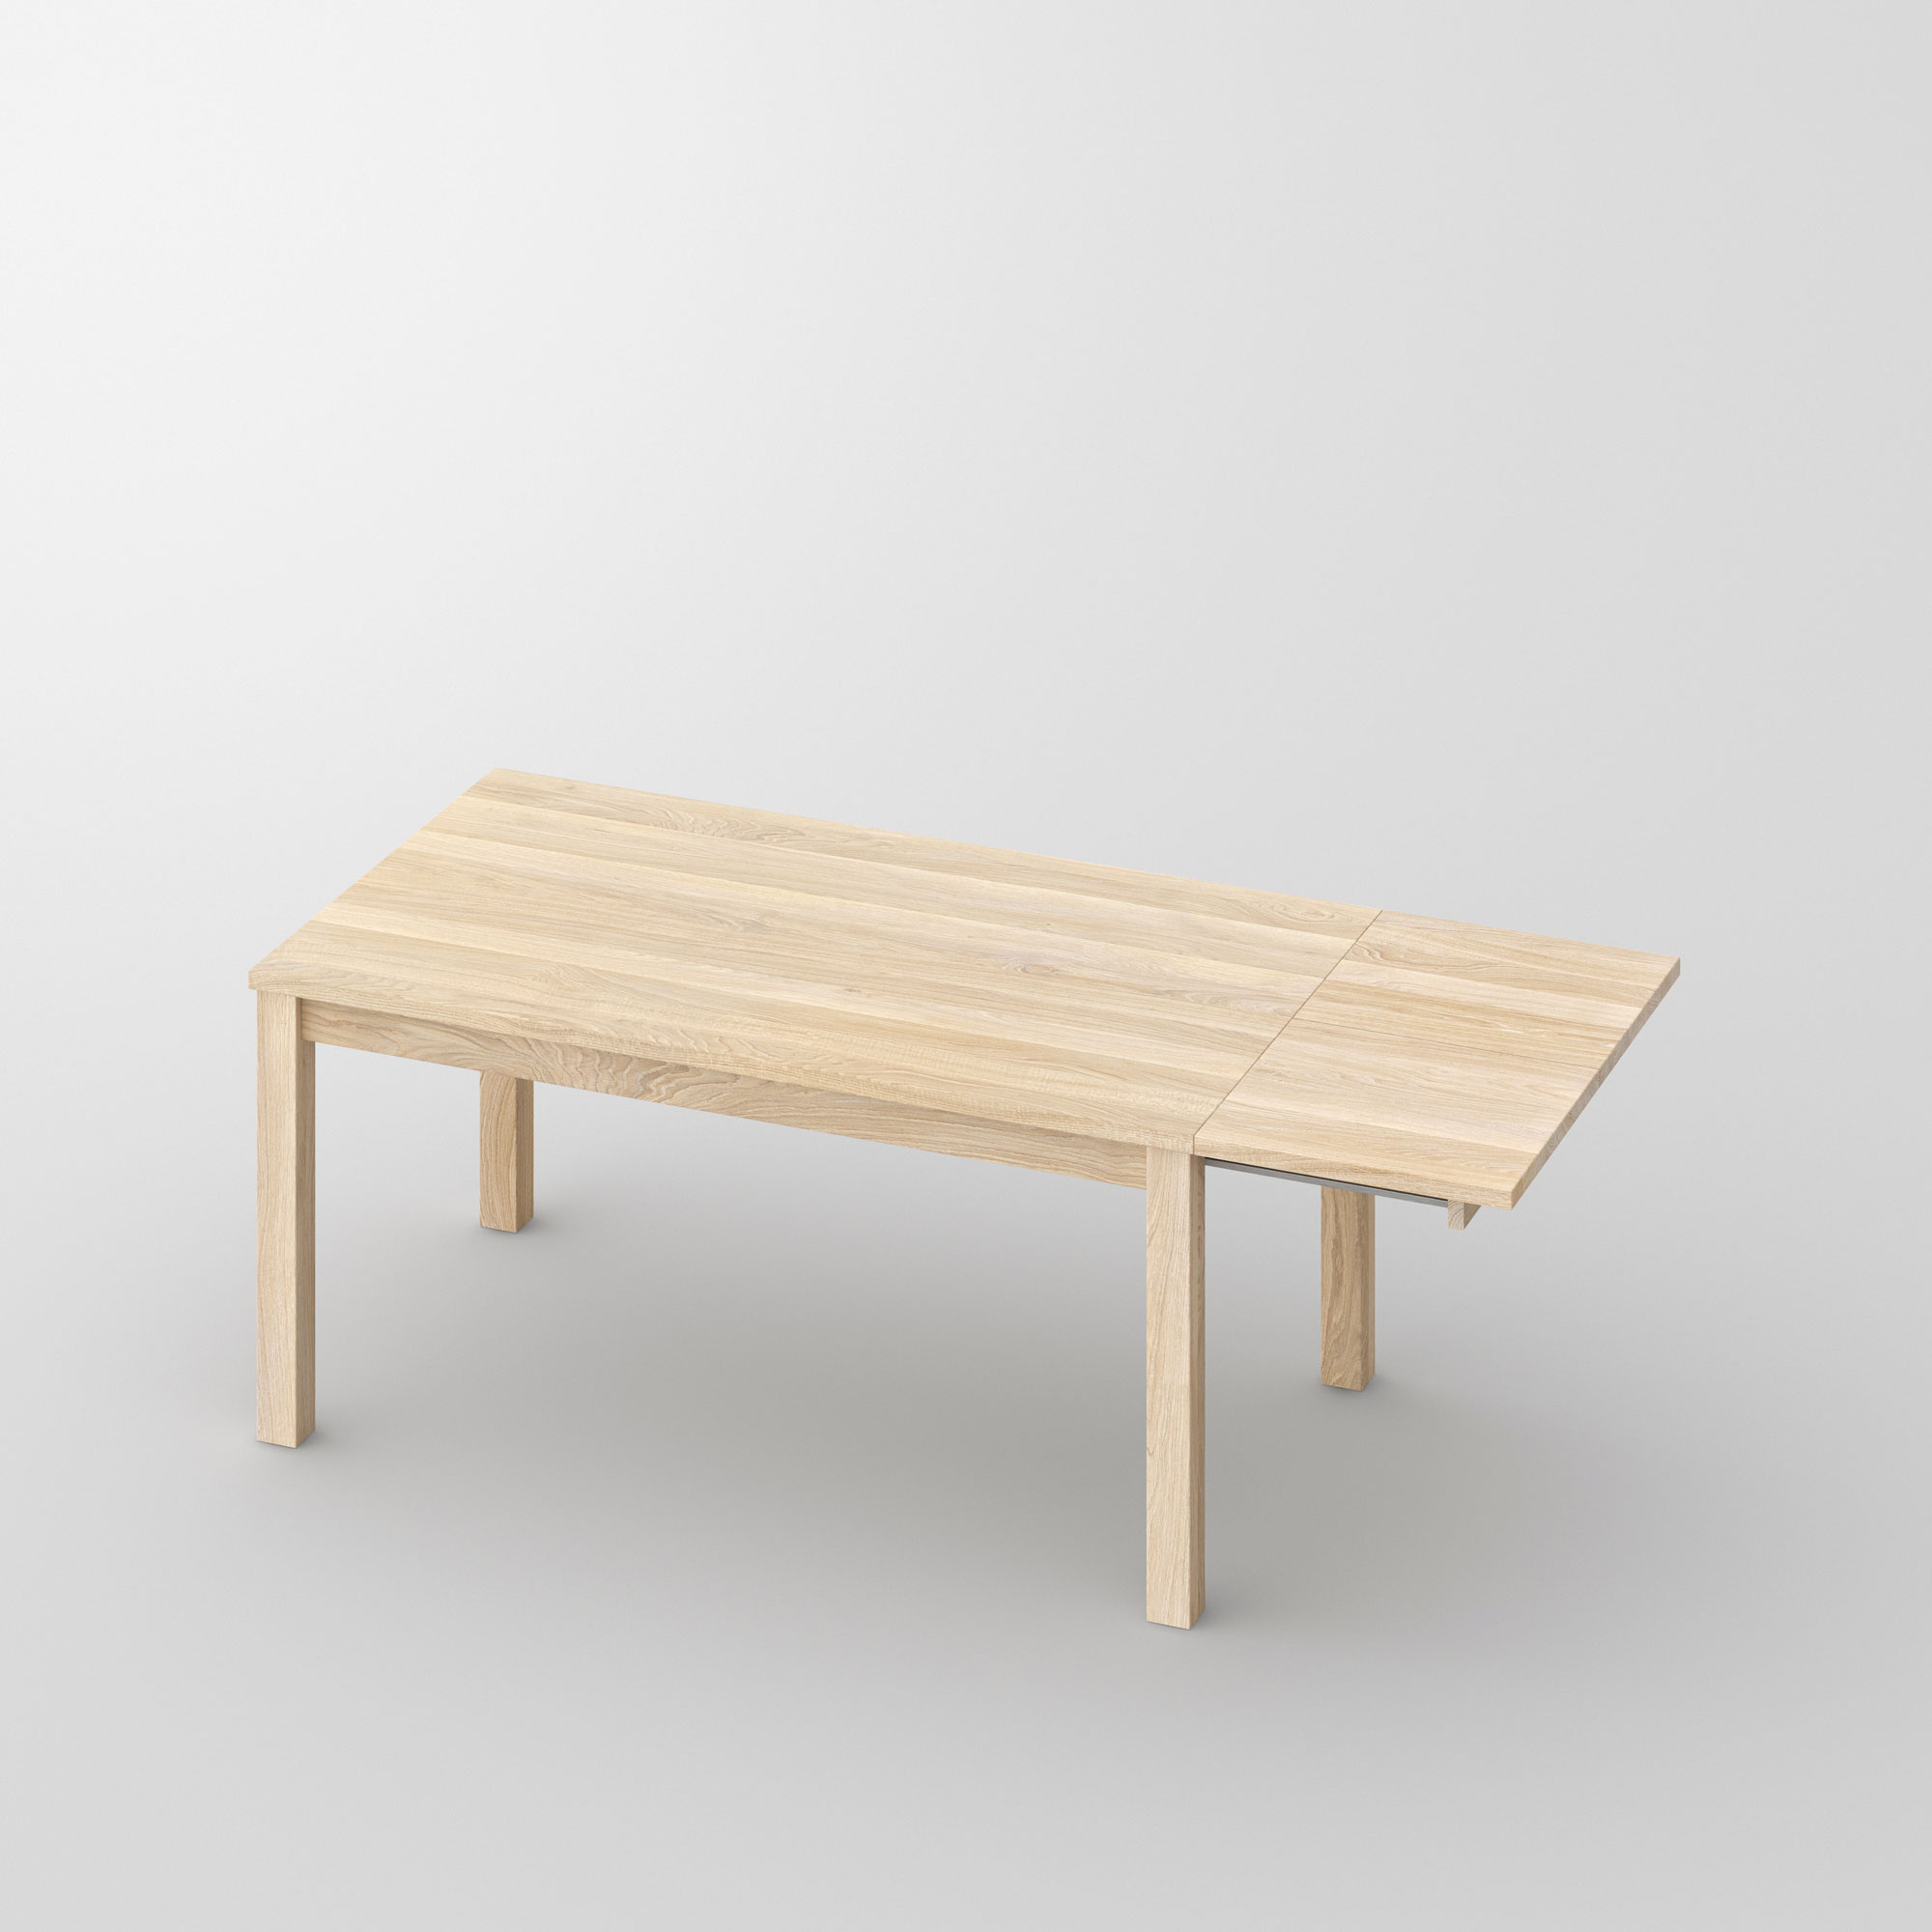 Custom-Made Solid Wood Table FORTE 3 B7X7 cam2 custom made in solid wood by vitamin design